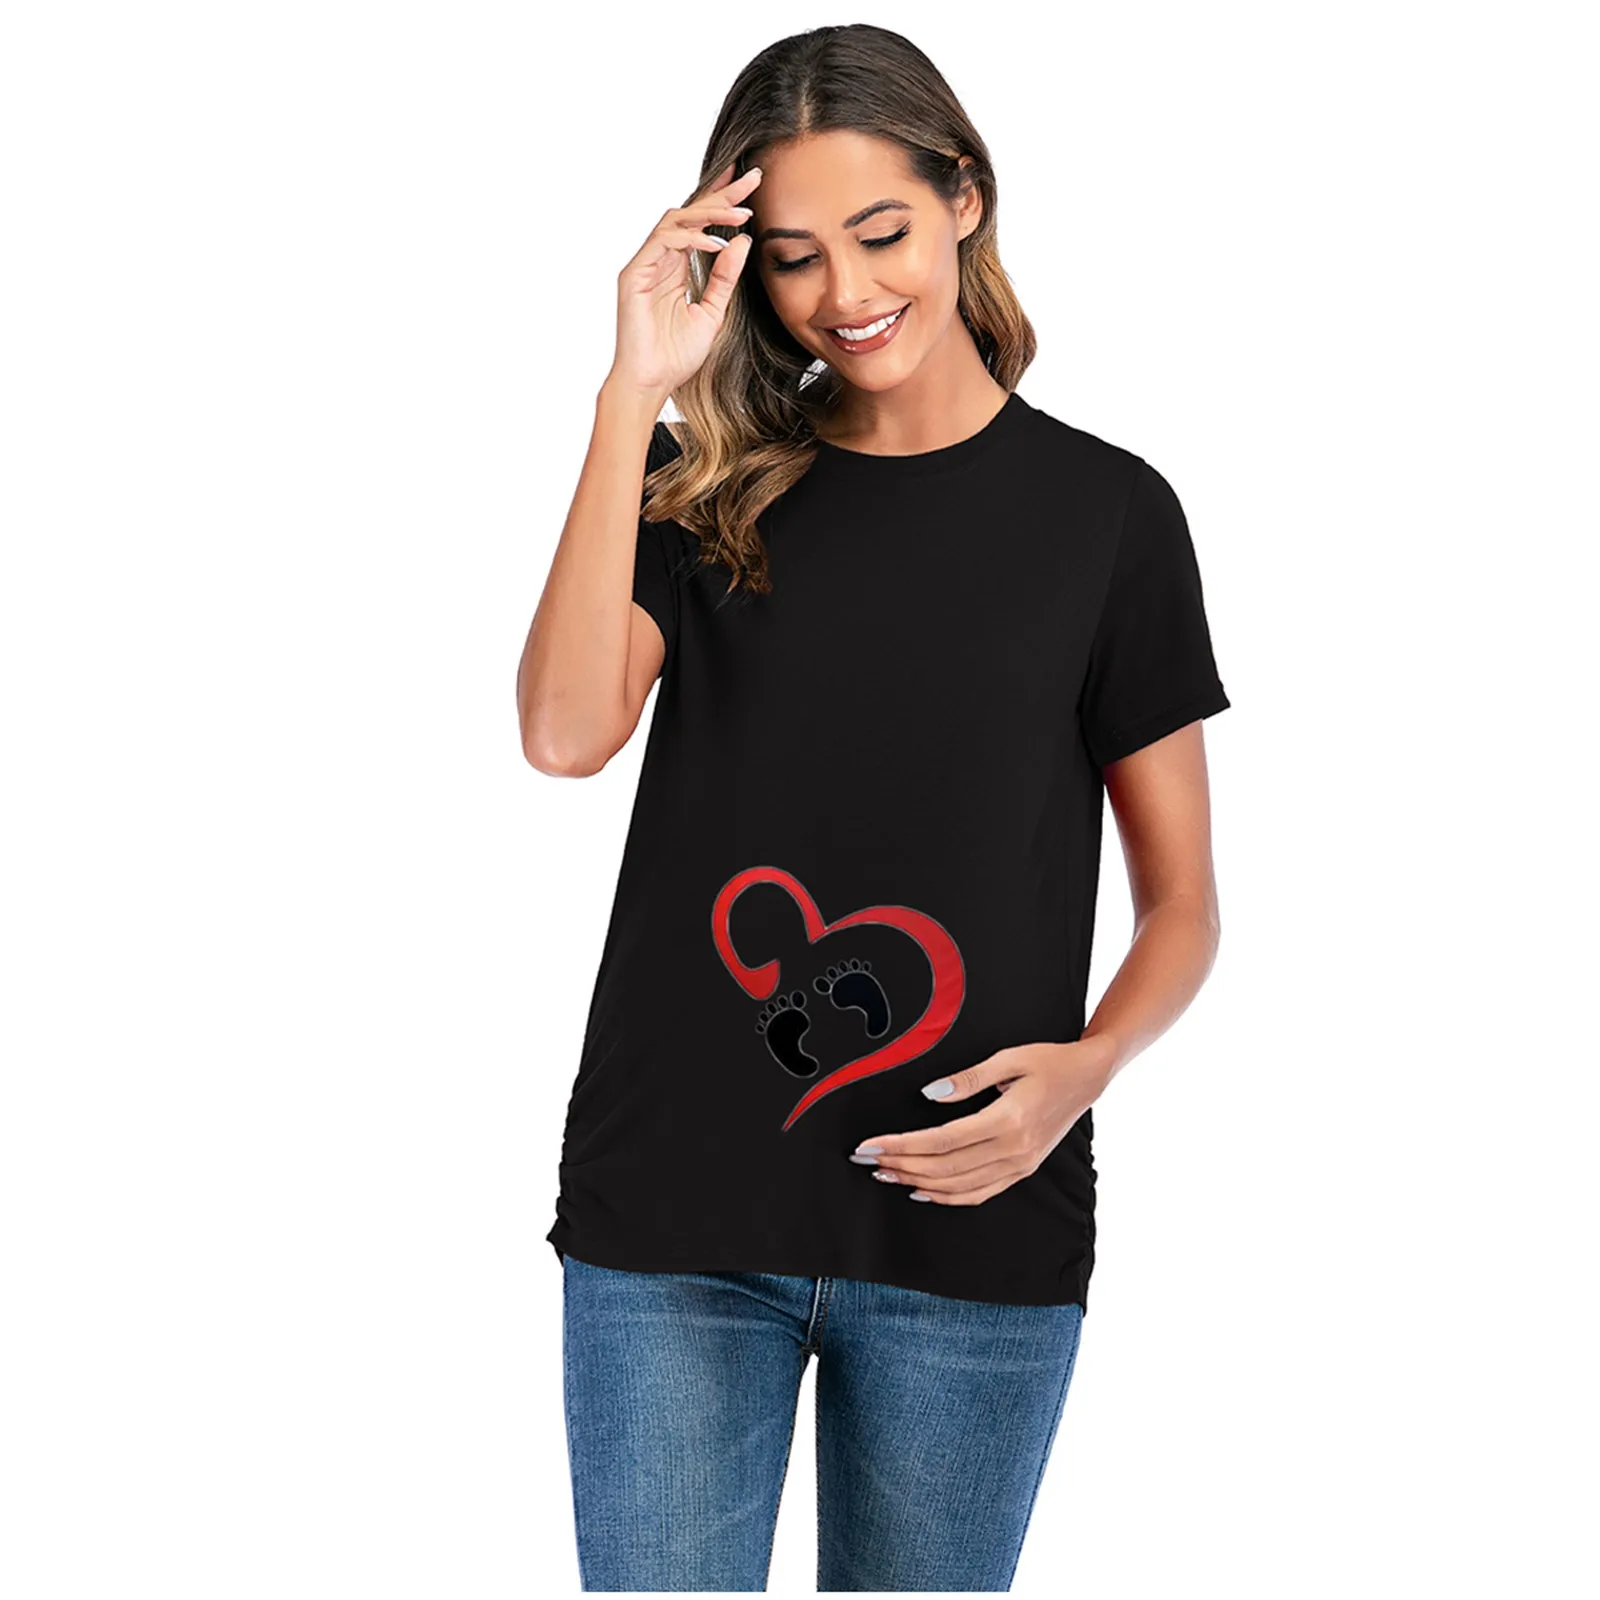 

Coming Soon 2021 Women Pregnancy T-shirt Pregnant Announcement Mama Maternity Clothing Short Sleeve Mom Clothes Graphic Tees